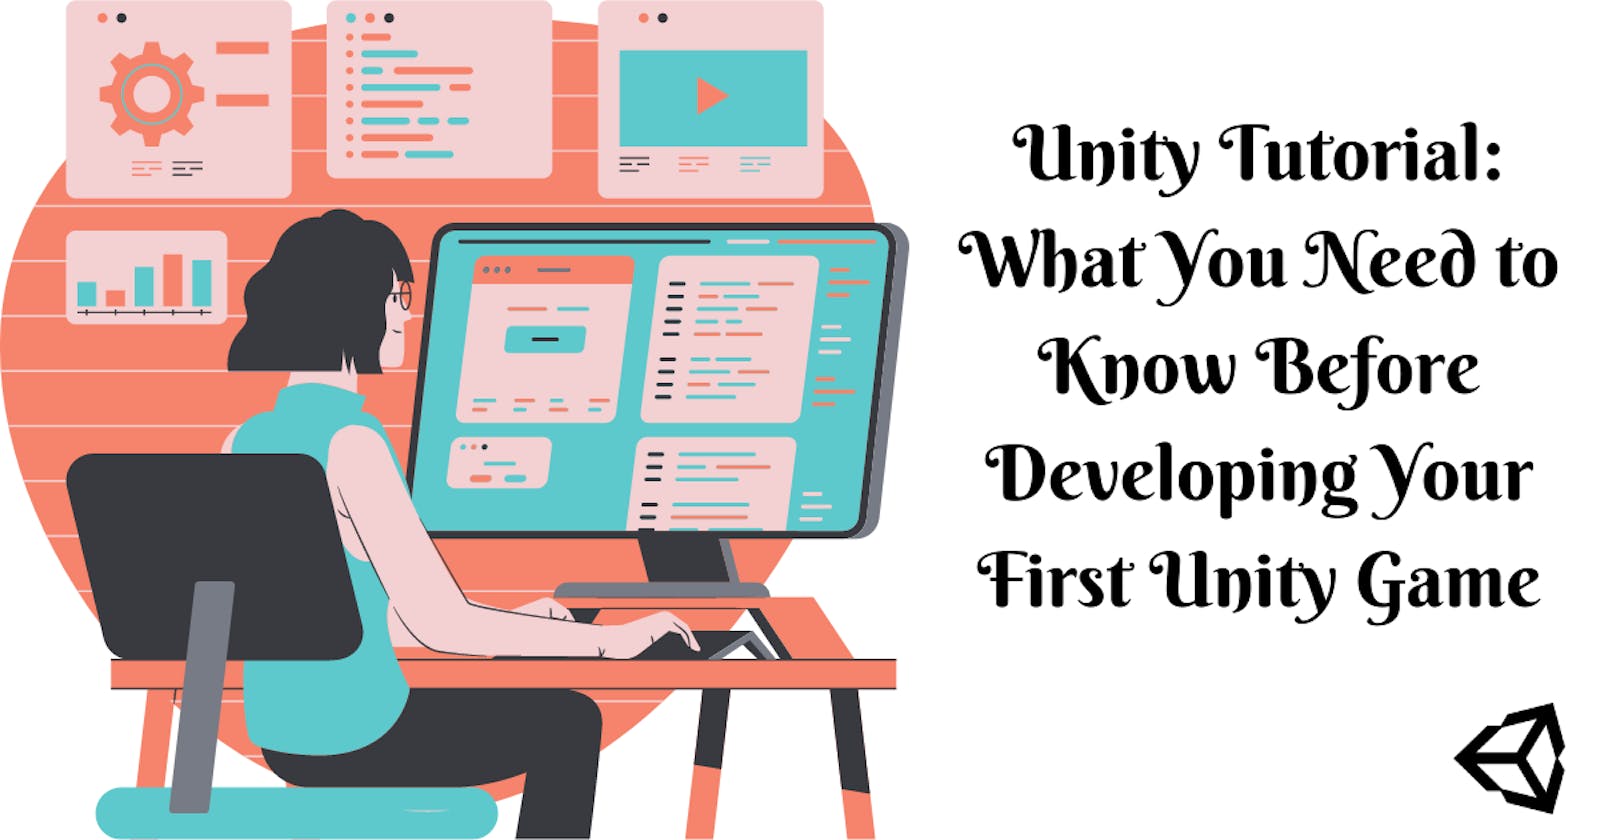 Unity Tutorial: What You Need to Know Before Developing Your First Unity Game